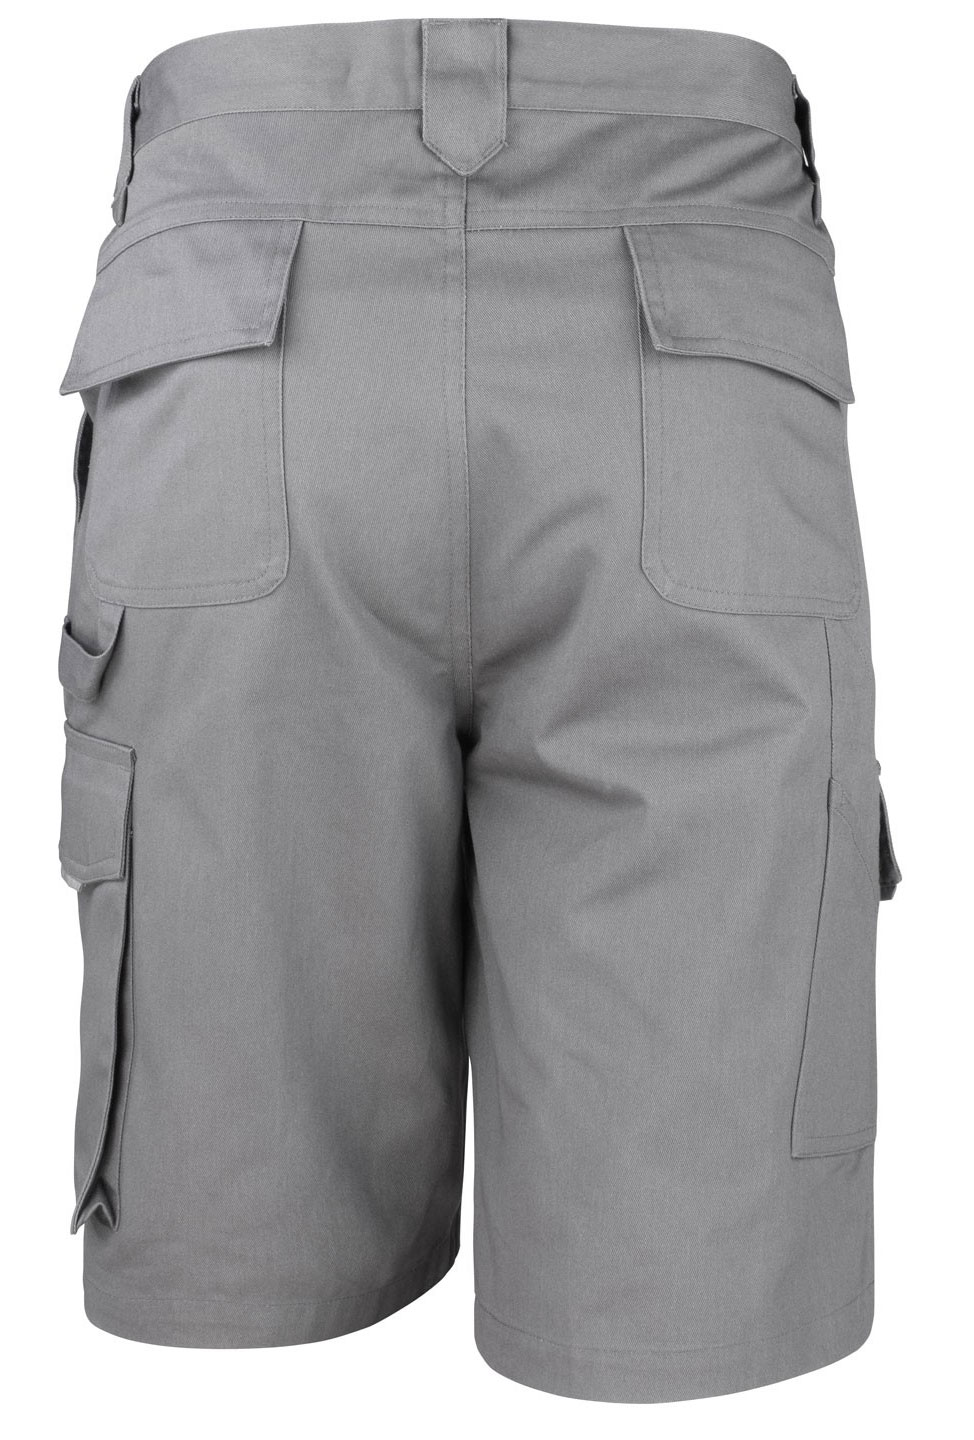 Action Shorts WorkGuard RT309